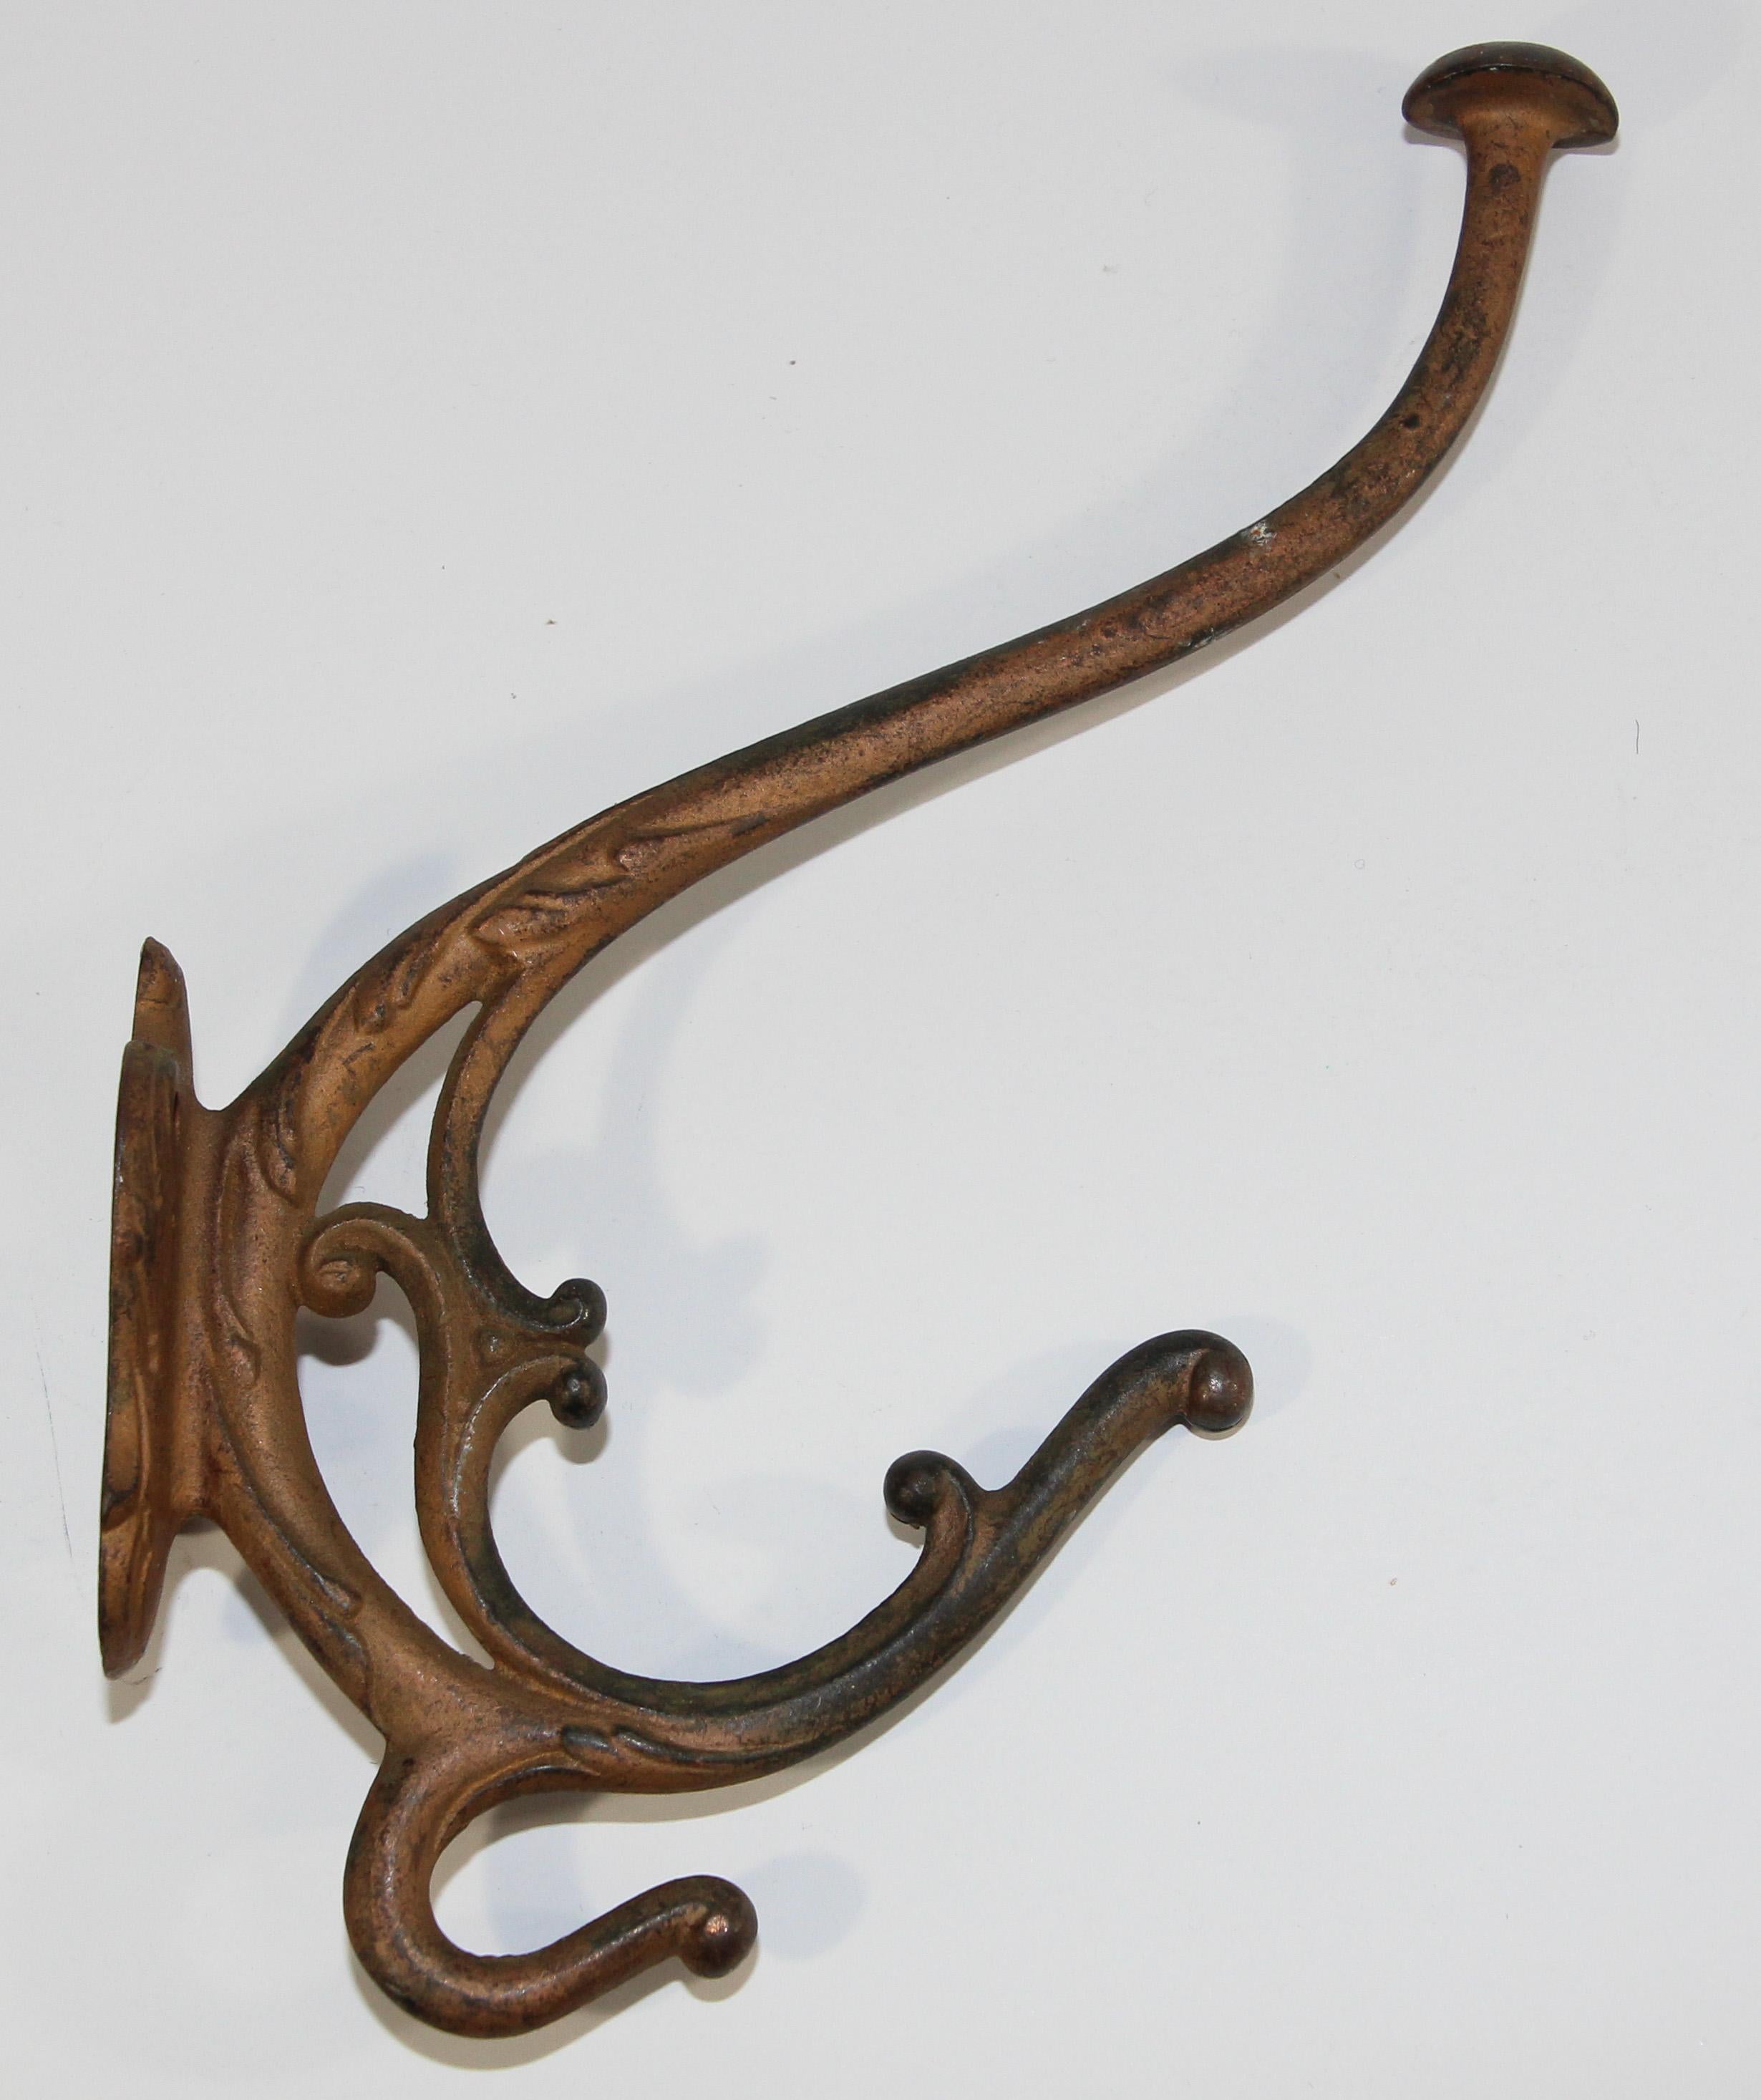 Vintage Art Art Nouveau style French cast iron triple hook
This is a vintage French metal coat hook dating from the early 1950s.
The hook is made of cast iron.
The upper part of the curved hook.
The bottom part has two hooks.
The hook is fastened to